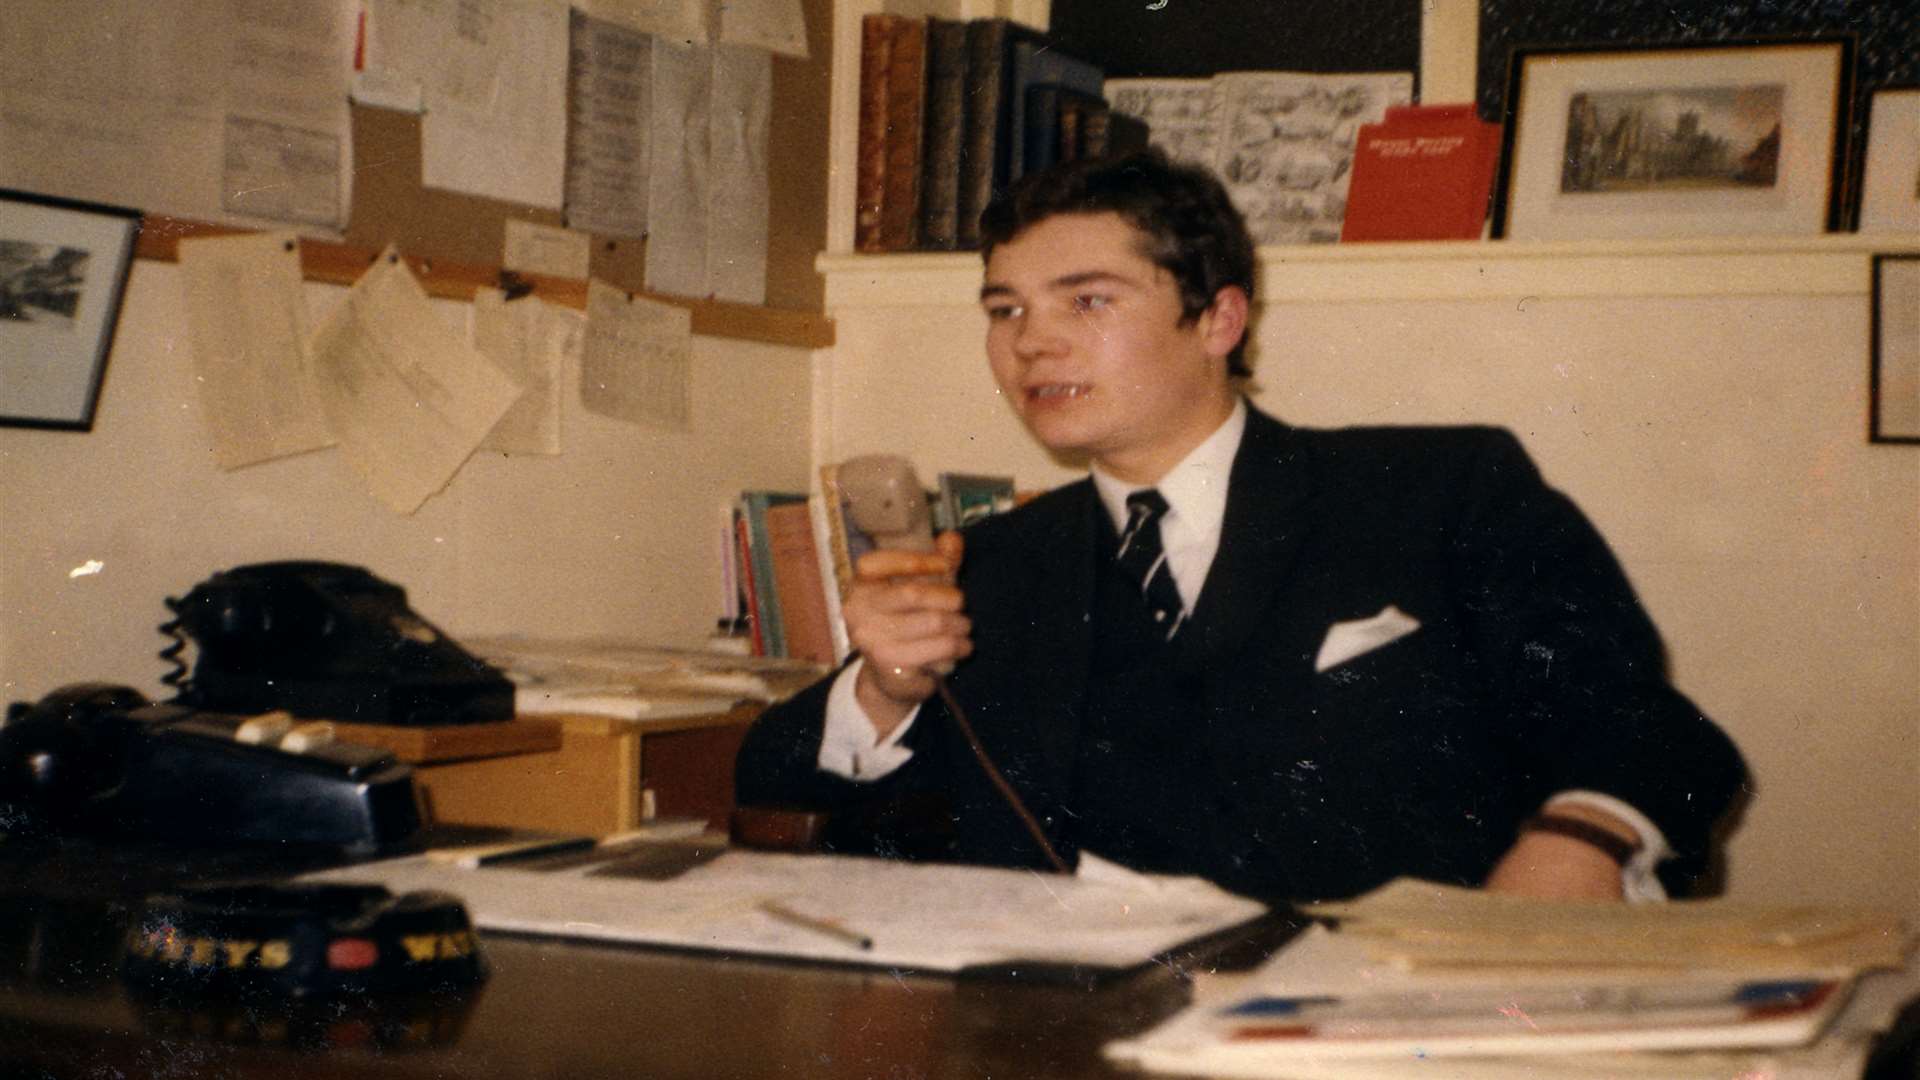 The late Richard Filmer in the mid 1960s